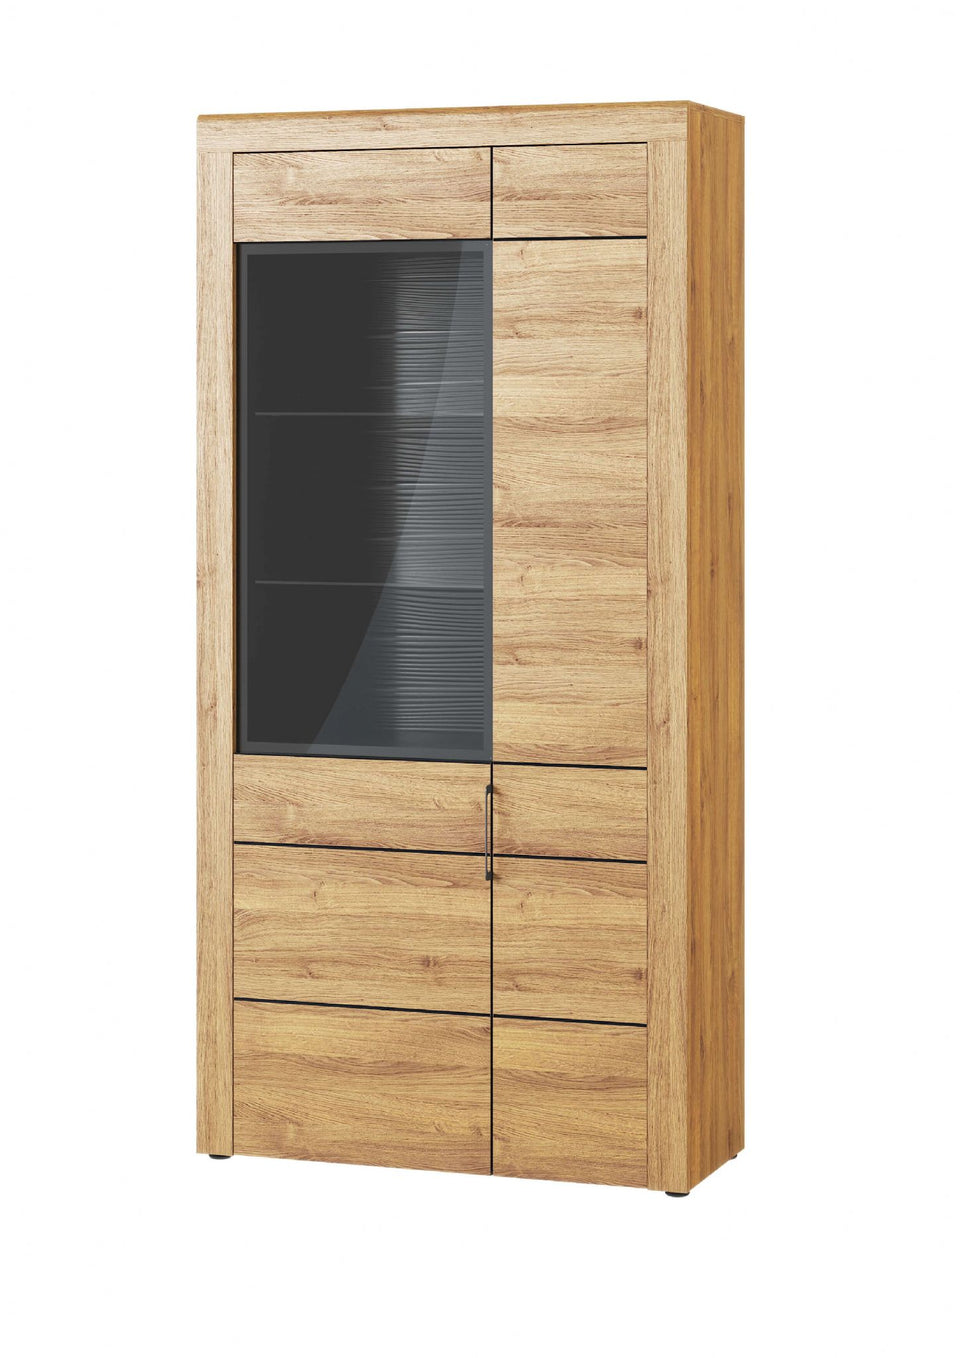 Large Oak Effect Display Cabinet with Black Background